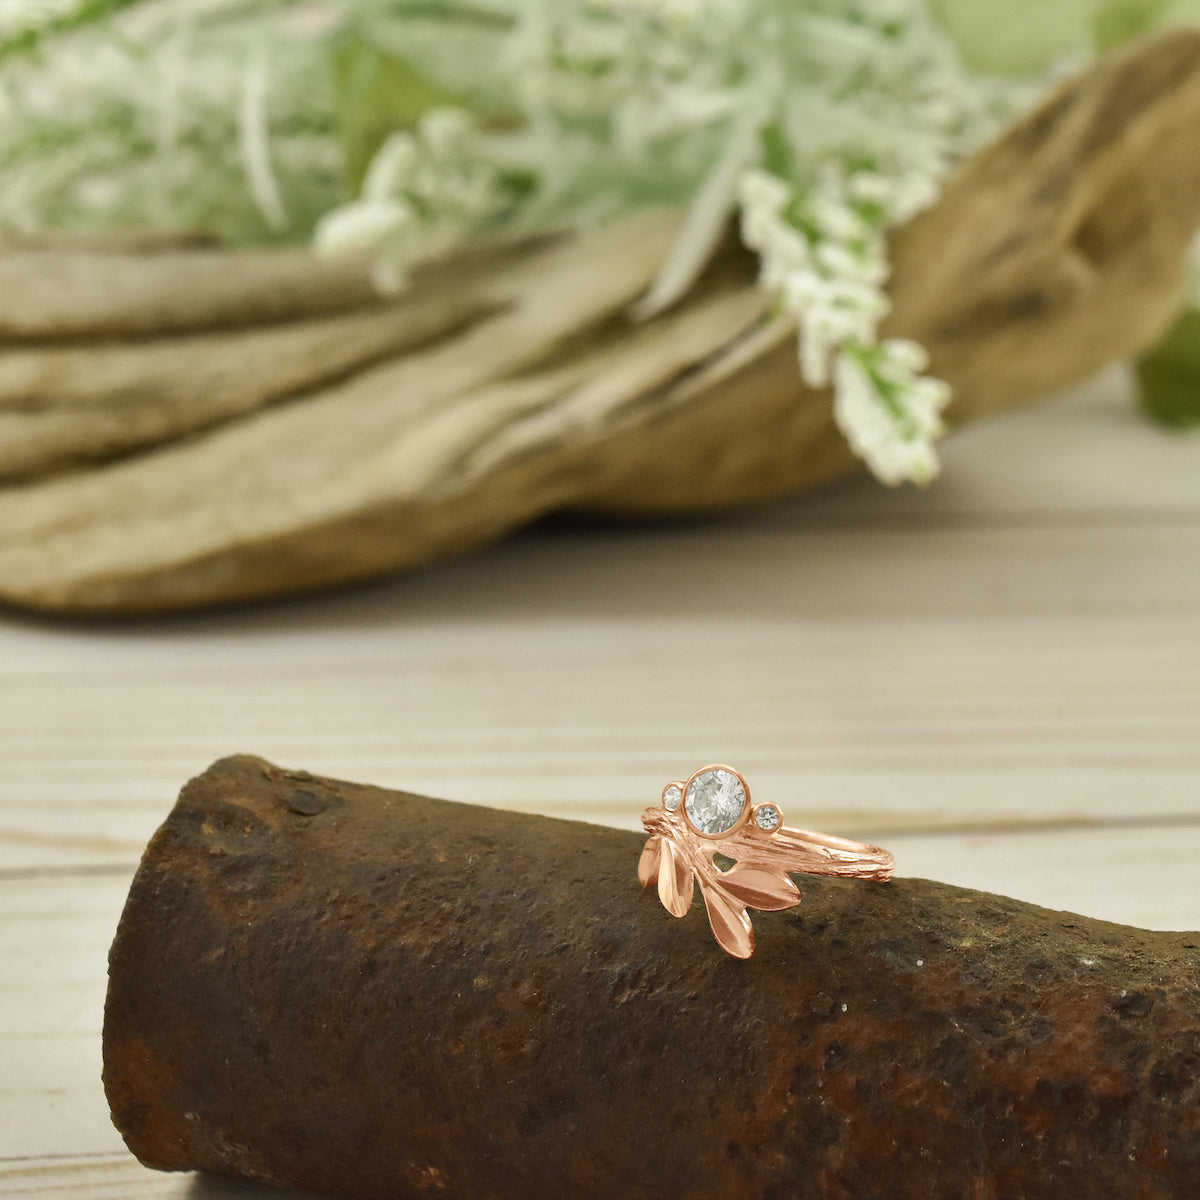 Gold Growing Love Diamond Twig Ring - your choice of 5mm stone & gold - Wedding Ring  Recycled Diamond / 18K Palladium White Gold  Recycled Diamond / 14K Rose Gold 6308 - handmade by Beth Millner Jewelry